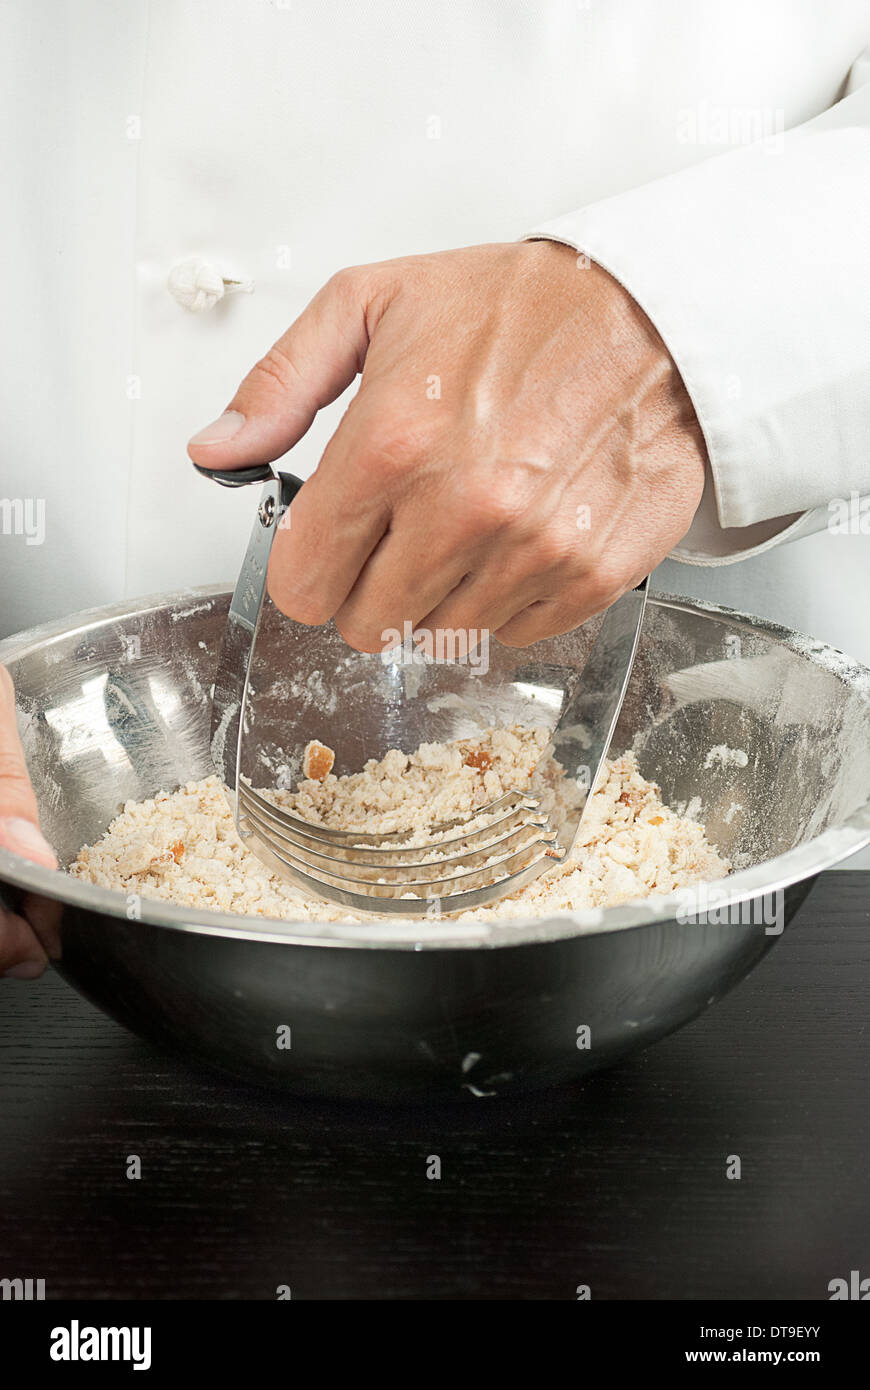 Close-up of a pastry chef preparing a crust Stock Photo